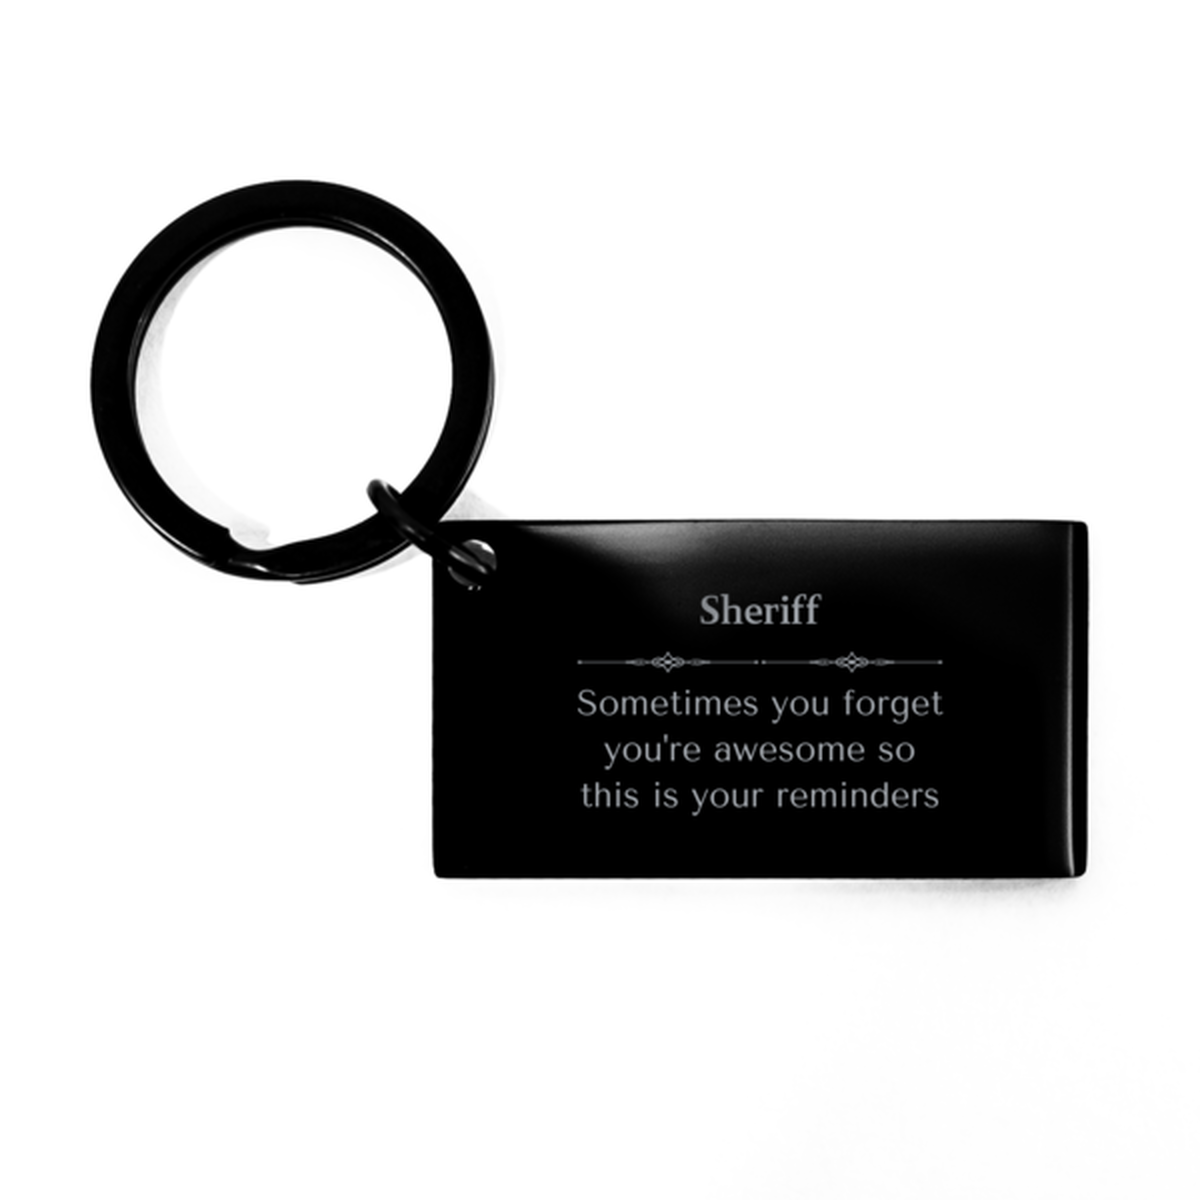 Sentimental Sheriff Keychain, Vice President Sometimes you forget you're awesome so this is your reminders, Graduation Christmas Birthday Gifts for Sheriff, Men, Women, Coworkers